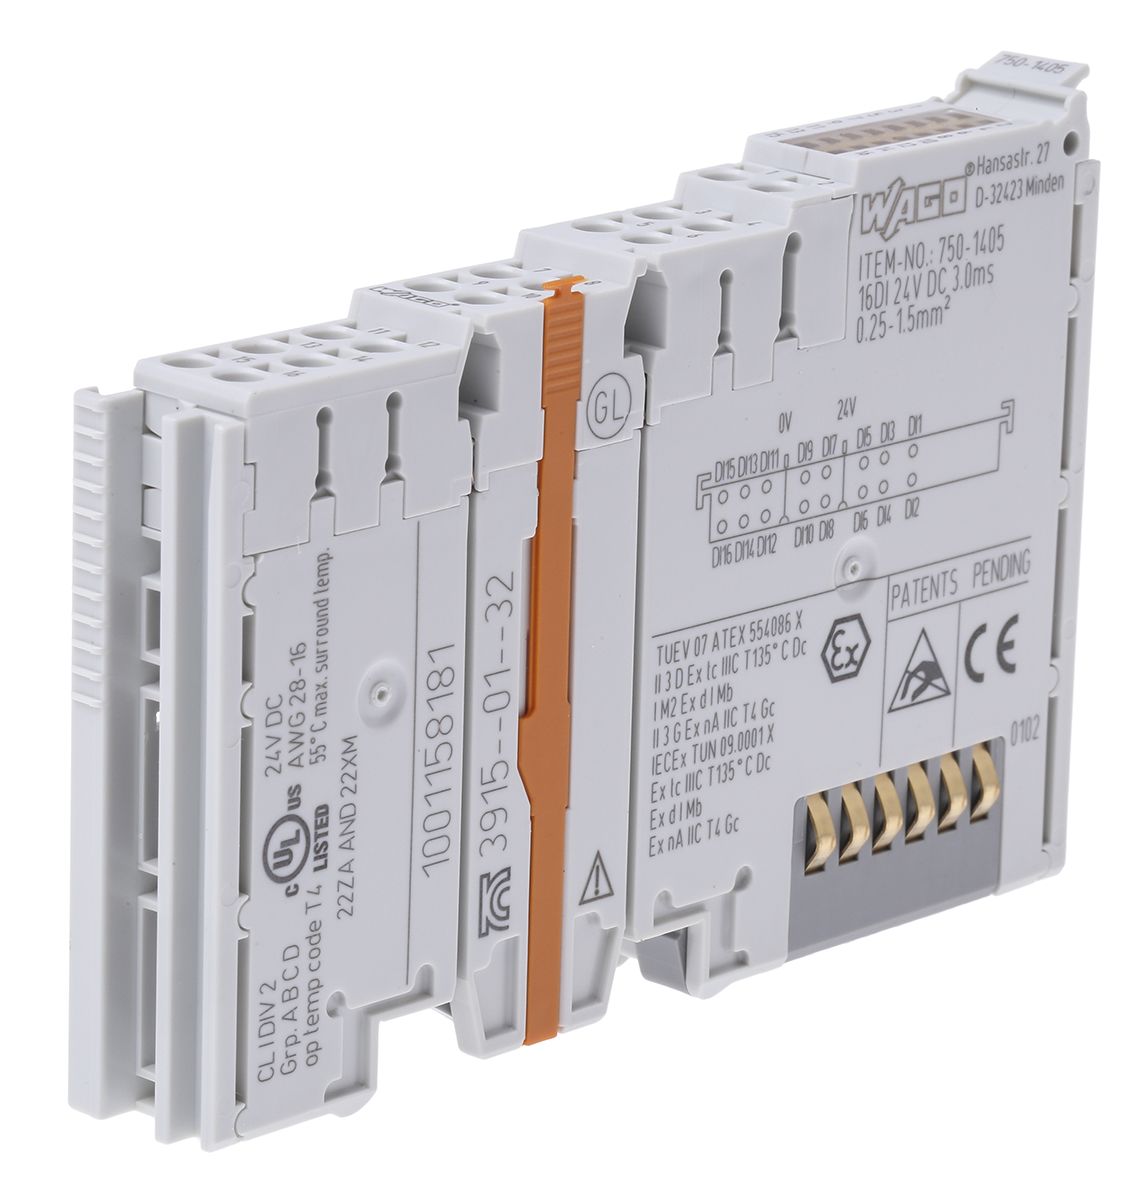 Wago PLC I/O Module for use with 750 Series, 67 x 12 x 100 mm, Digital, Micro 800, 24 V dc